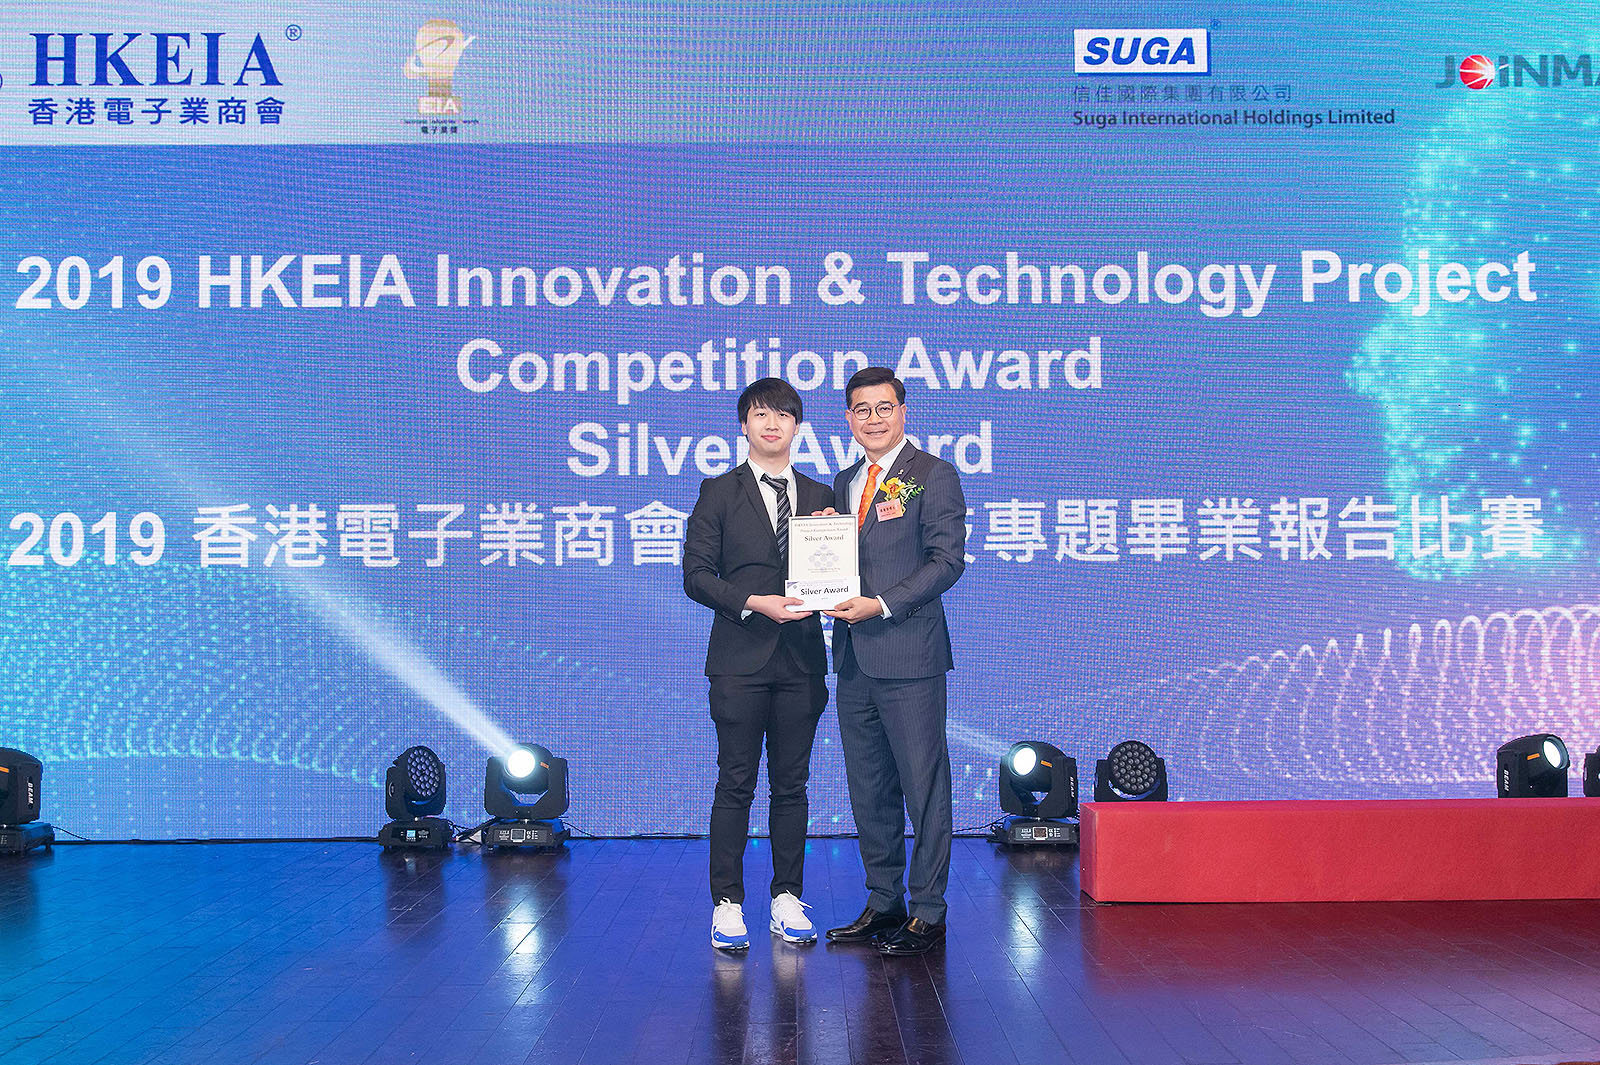 Mr Hang (left) received the Silver Award of the HKEIA Innovation & Technology Project Competition Award 2019.